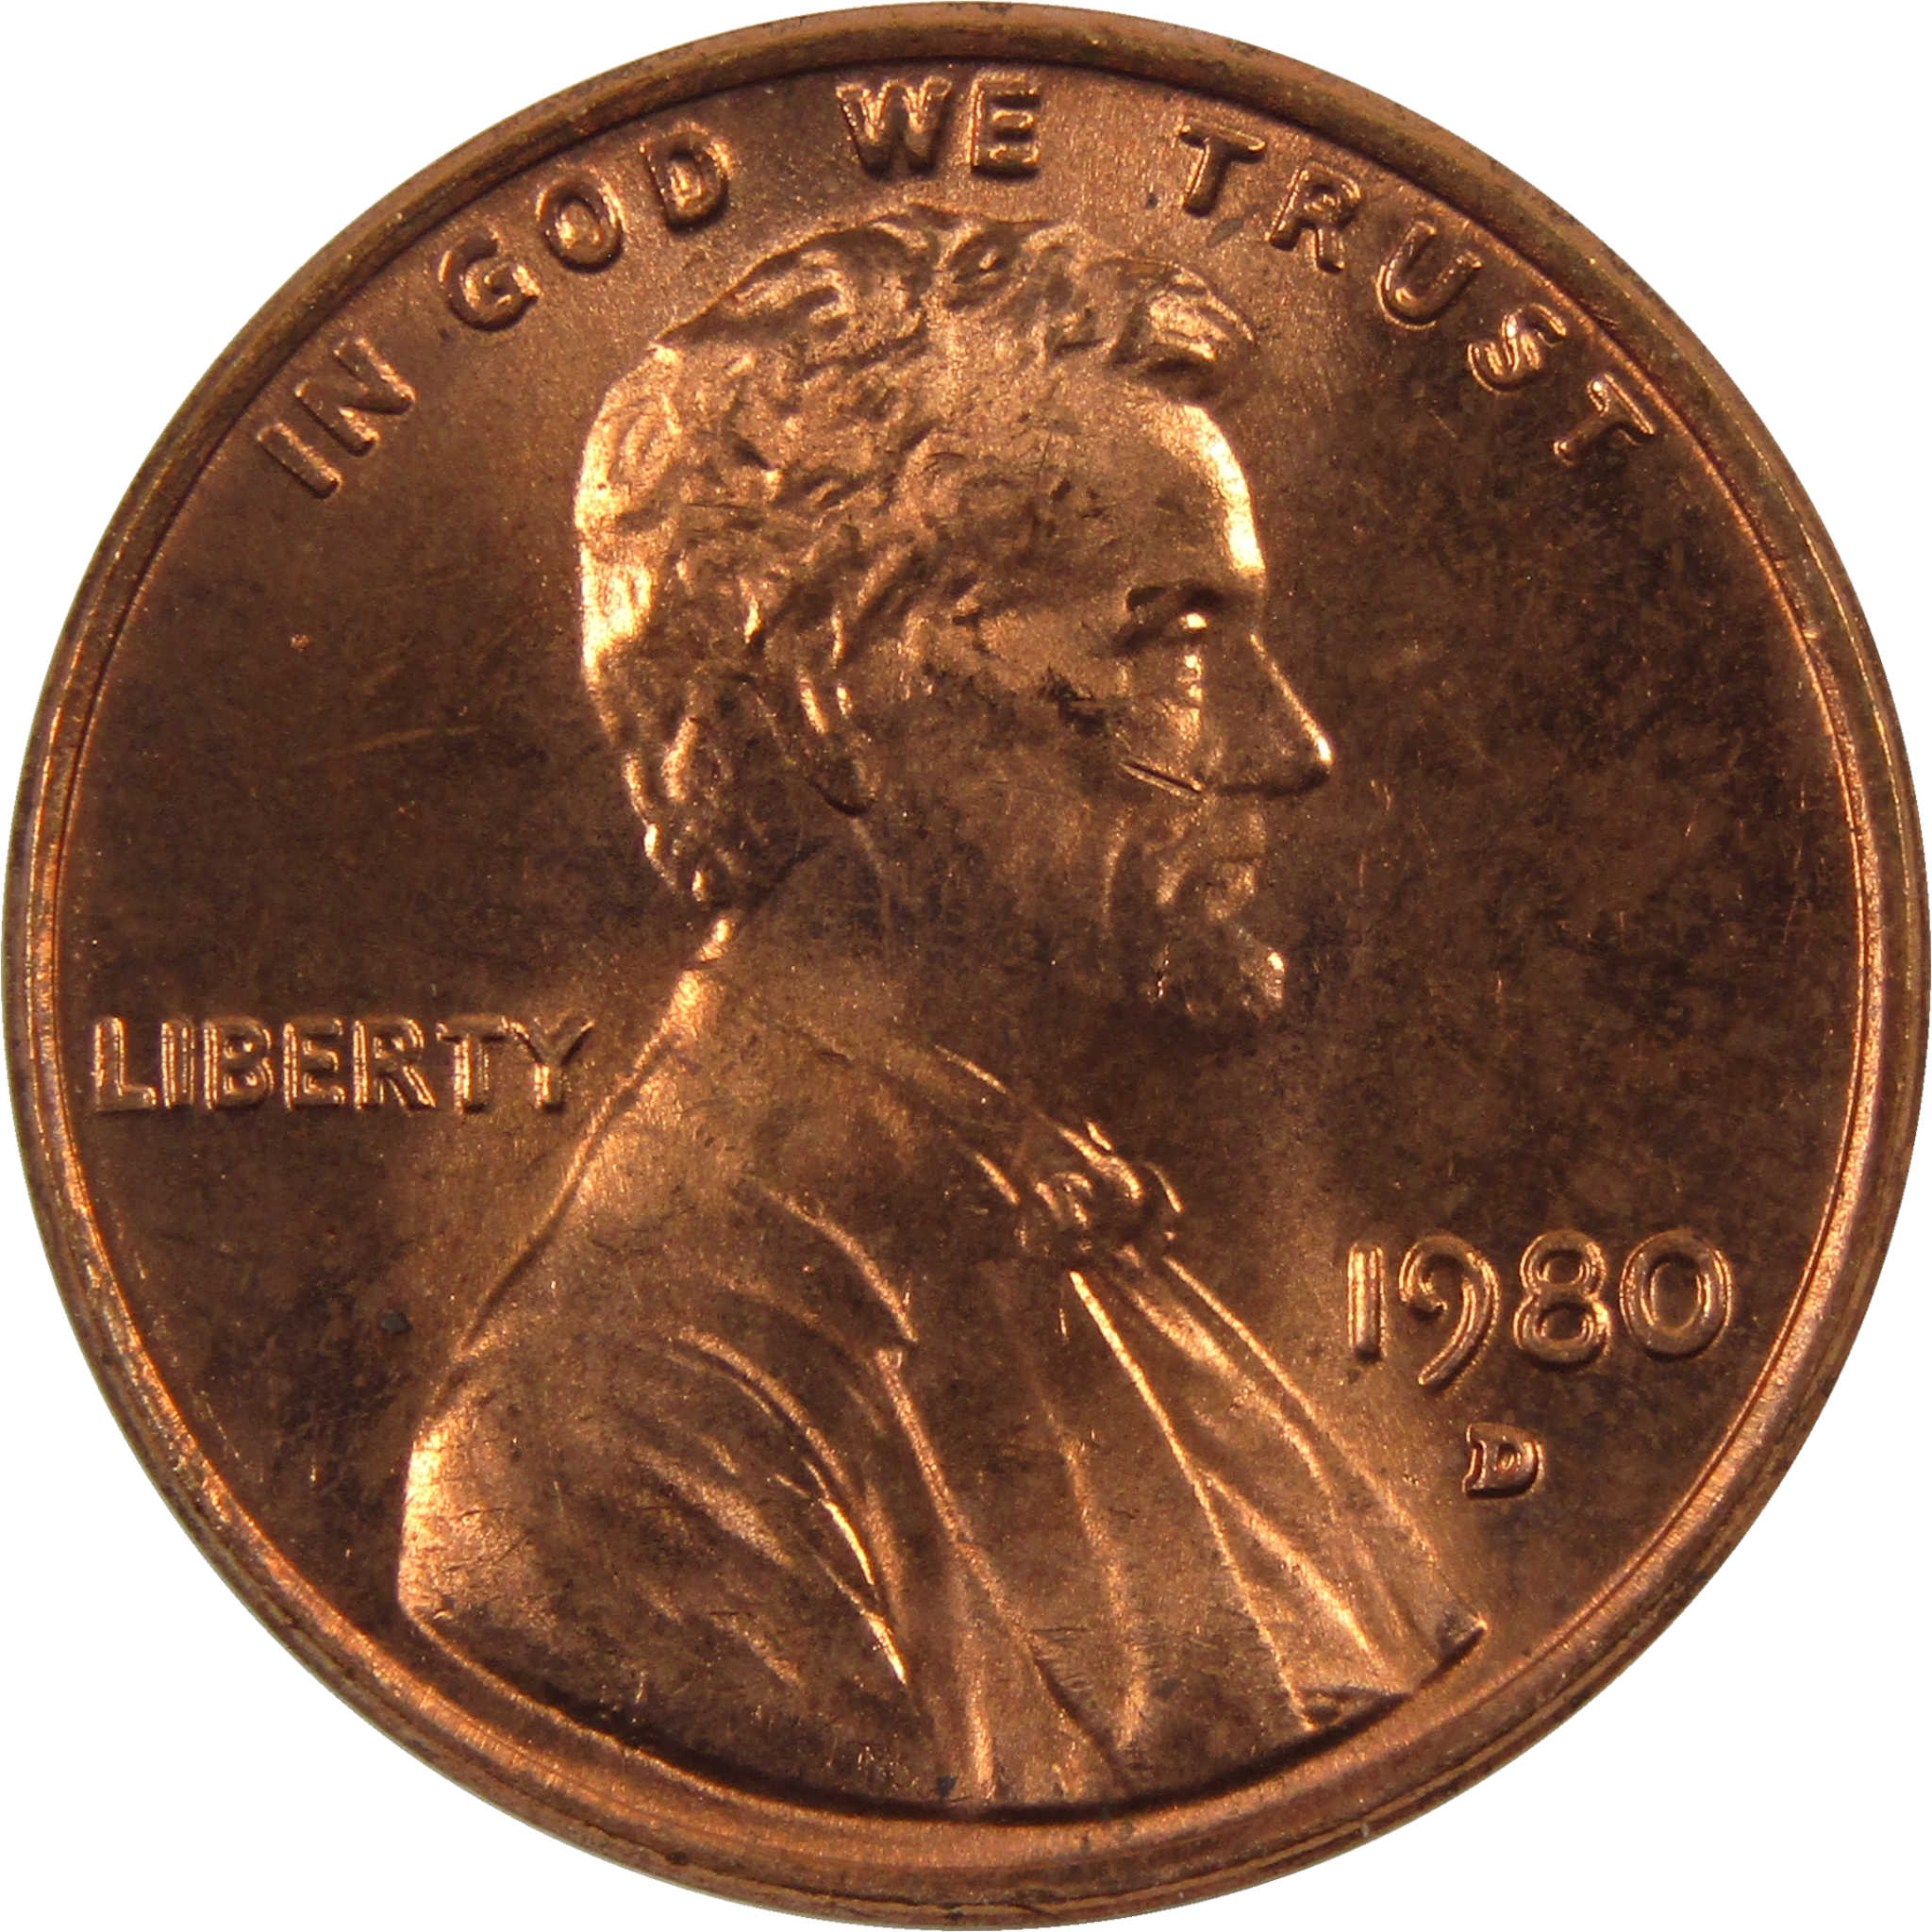 1980 D Lincoln Memorial Cent BU Uncirculated Penny 1c Coin